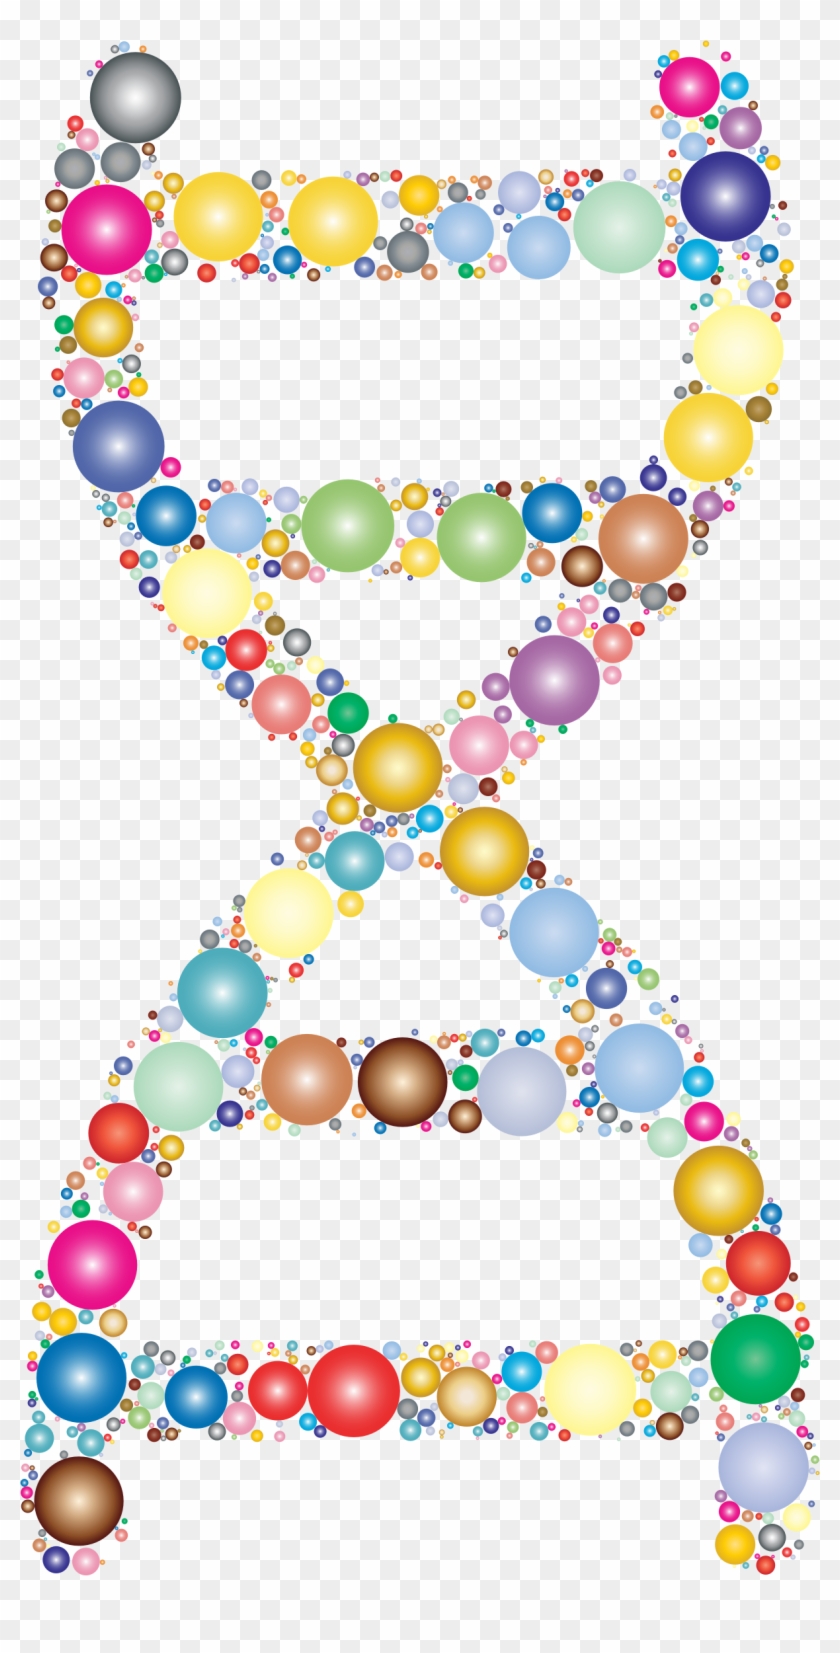 This Free Icons Png Design Of Prismatic Dna Helix Circles - Clip Art Molecular Biology Transparent Png #3262825